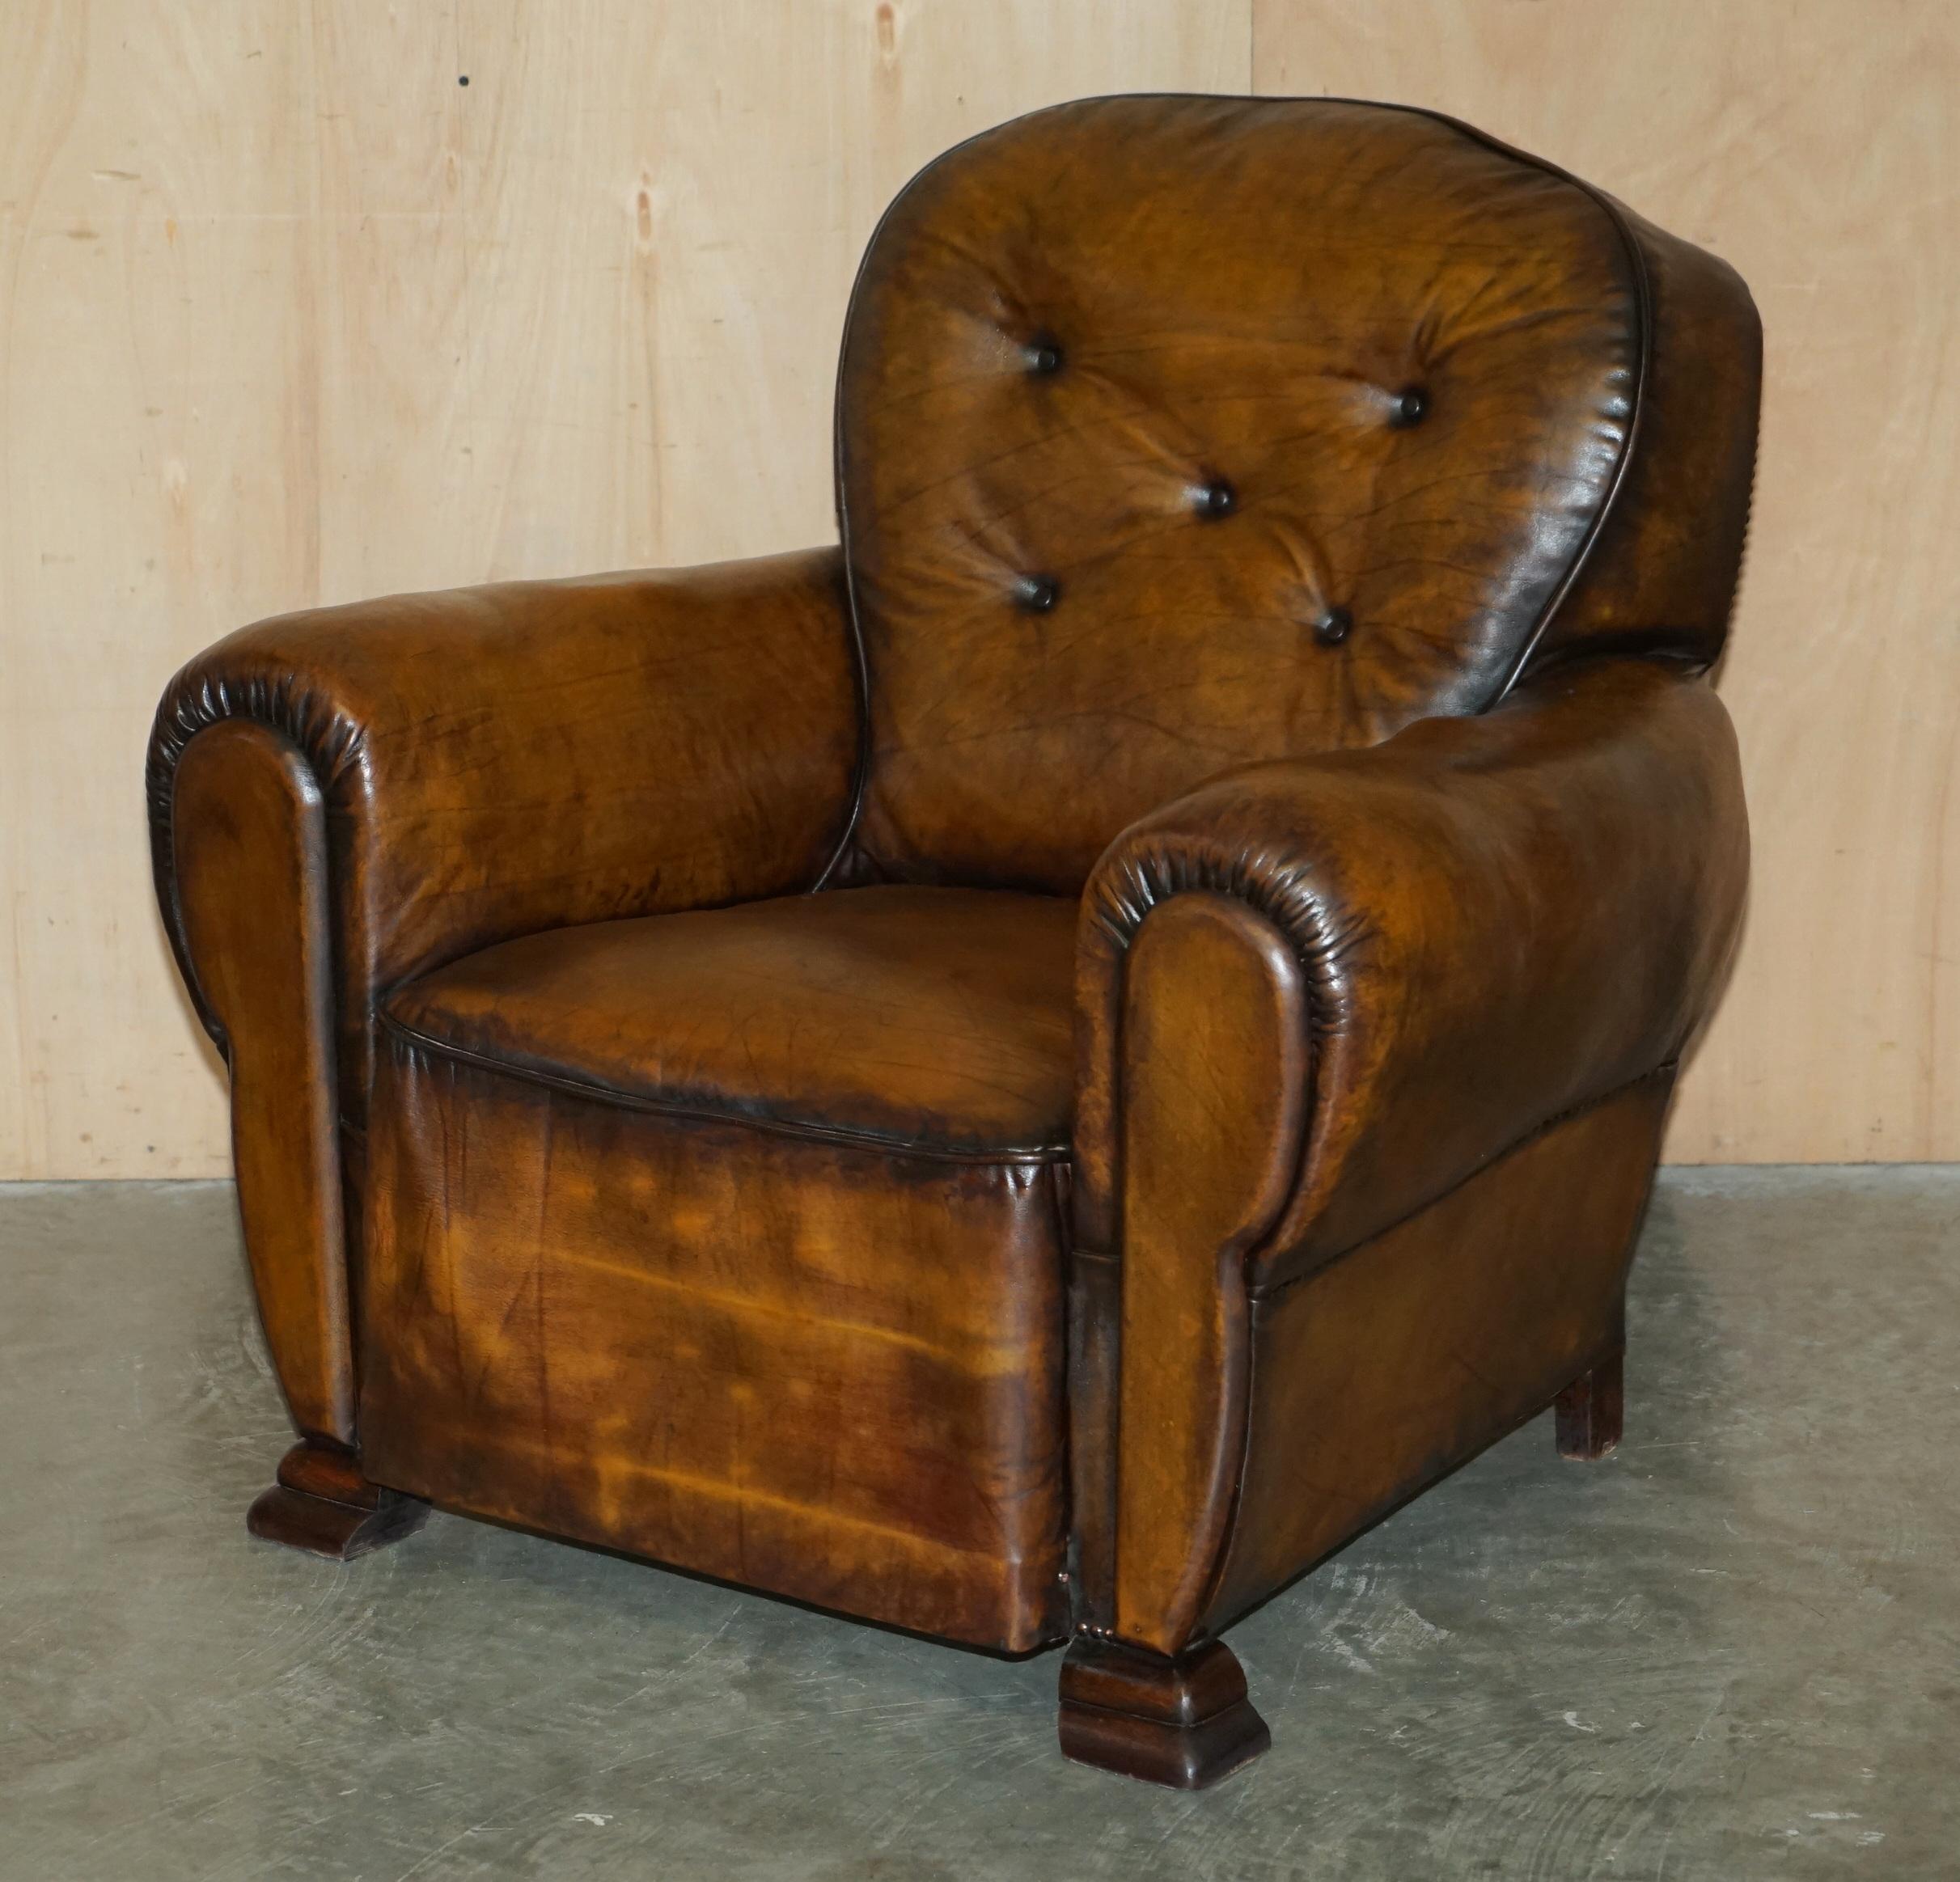 Royal House Antiques

Royal House Antiques is delighted to offer for sale this stunning fully restored pair of Art Deco hand dyed rich Cigar brown leather club armchairs.

Please note the delivery fee listed is just a guide, it covers within the M25